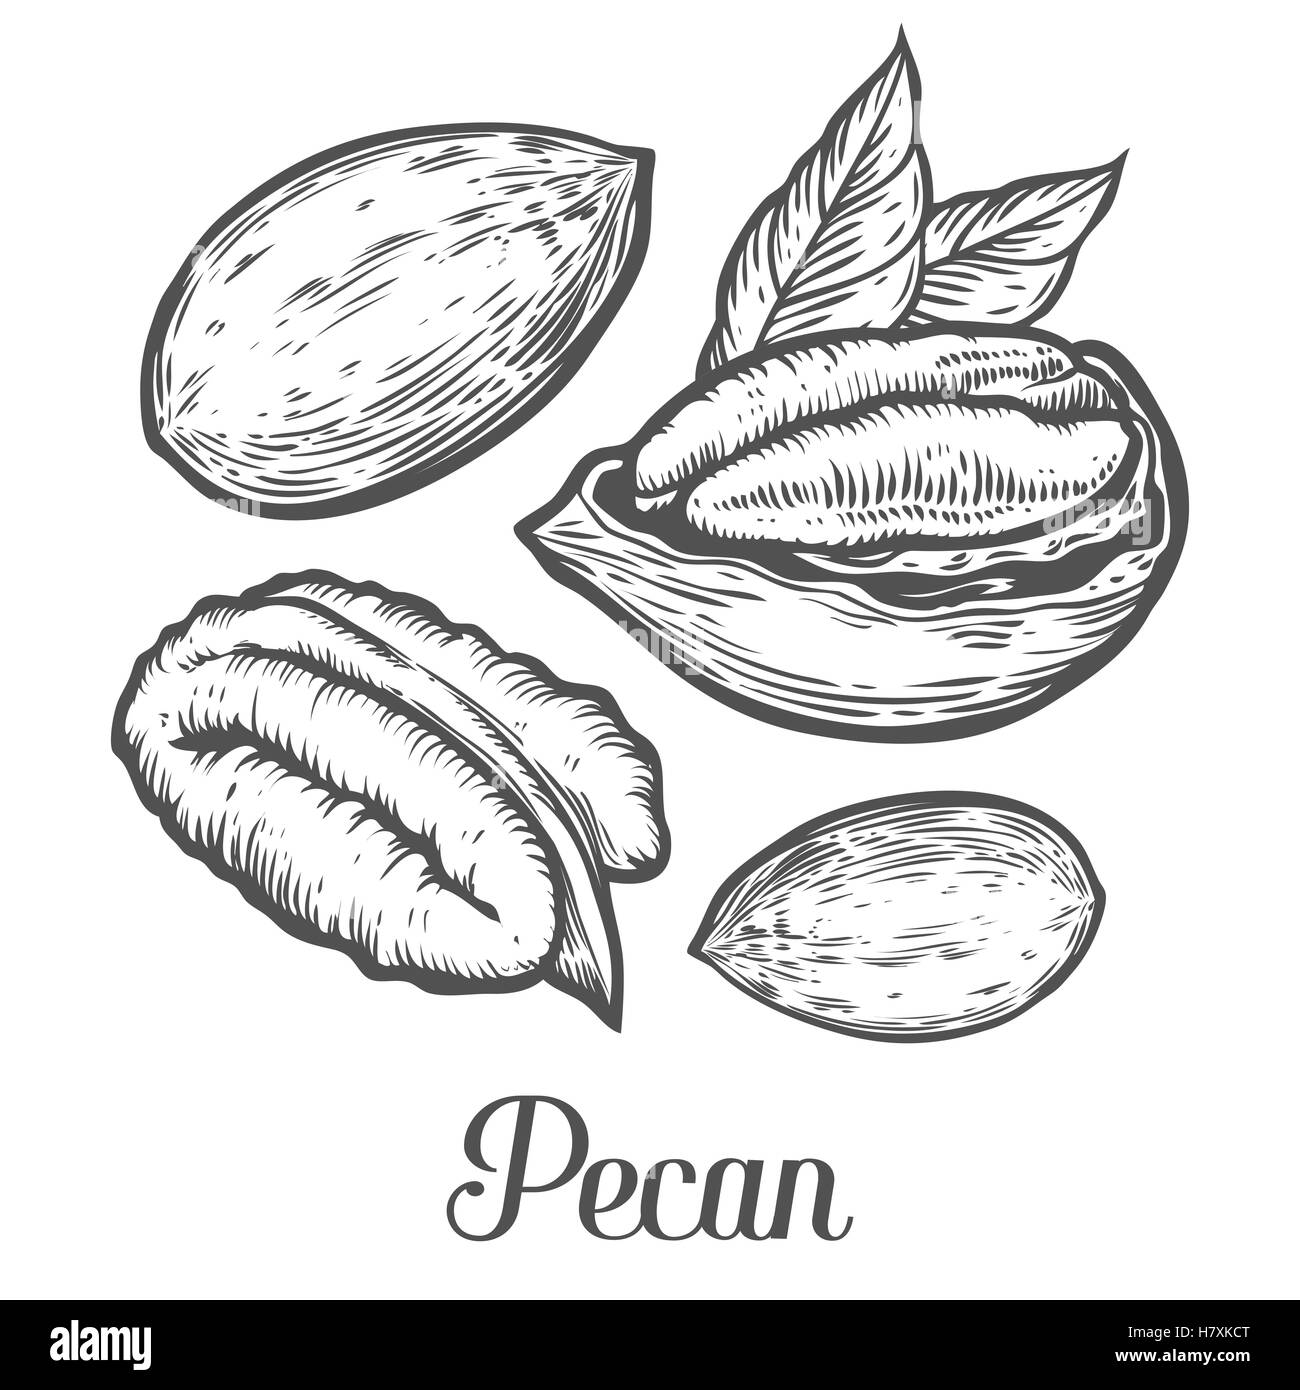 Pecan nut seed vector. Isolated on white background. Pecan butter food ingredient. Engraved hand drawn pecan illustration in ret Stock Vector